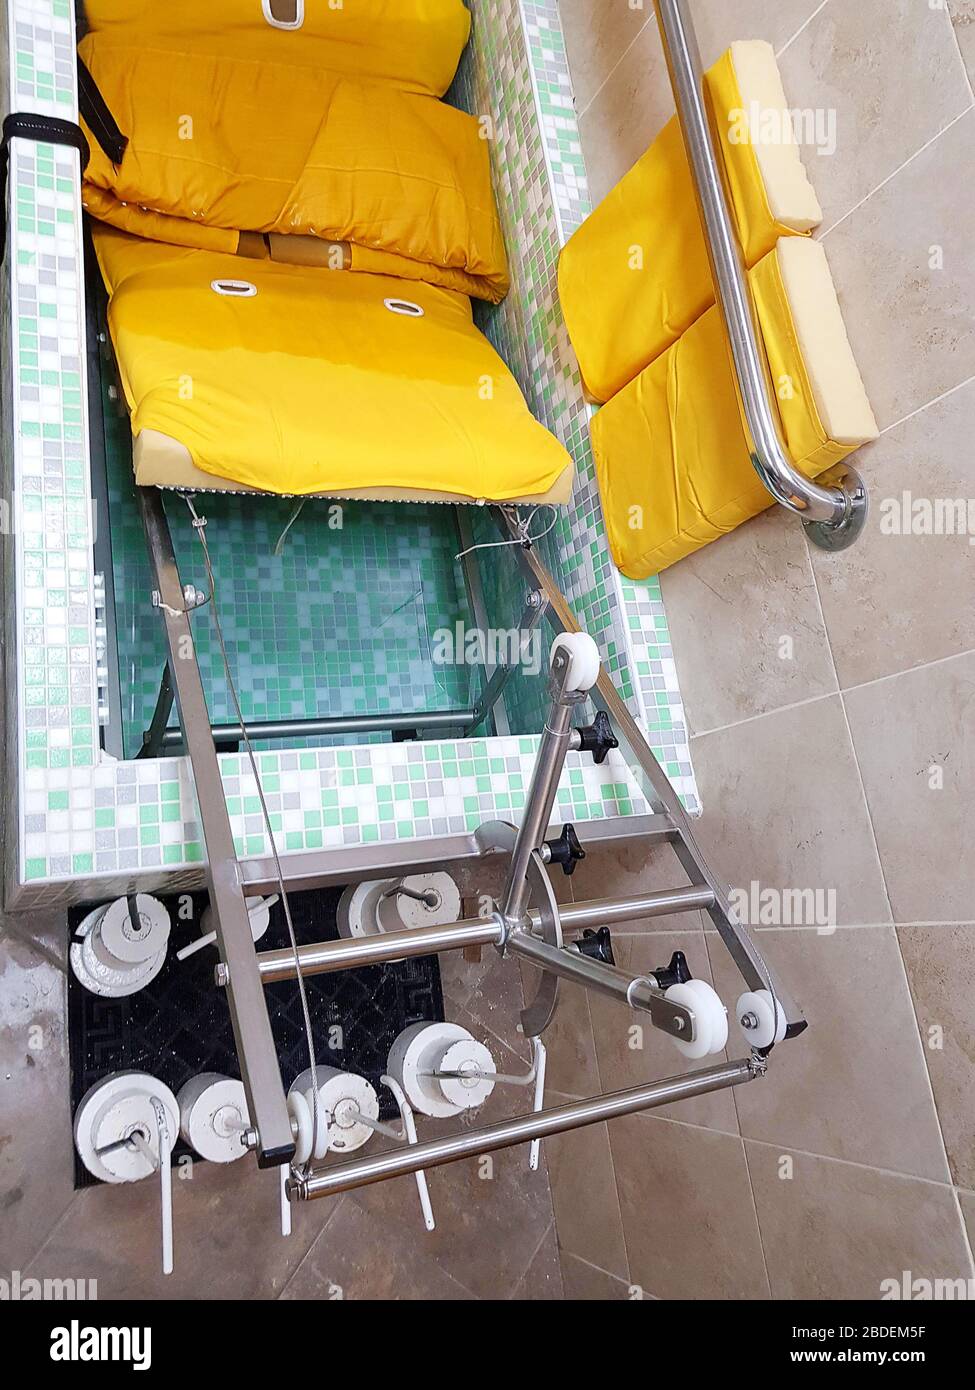 Universal apparatus for underwater extension of the spine in a rehabilitation clinic. Bathtub for extension of the spinal cord. Lumbar extension. Stock Photo